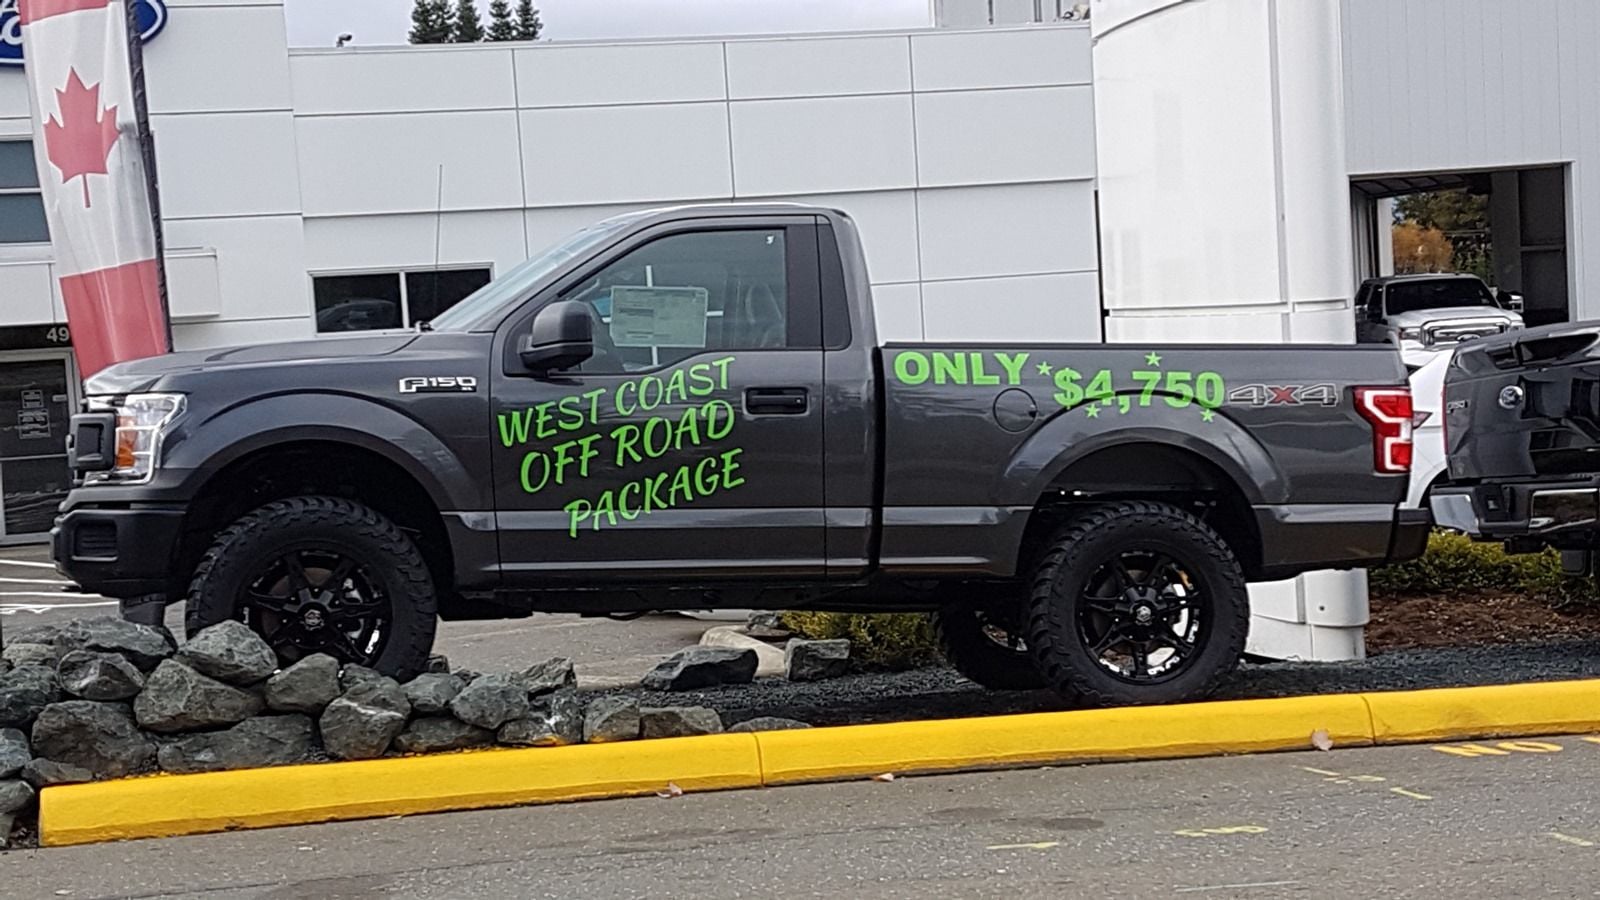 Regular Cab Cool F150 Ford Truck Lift Tires Cabs Road.